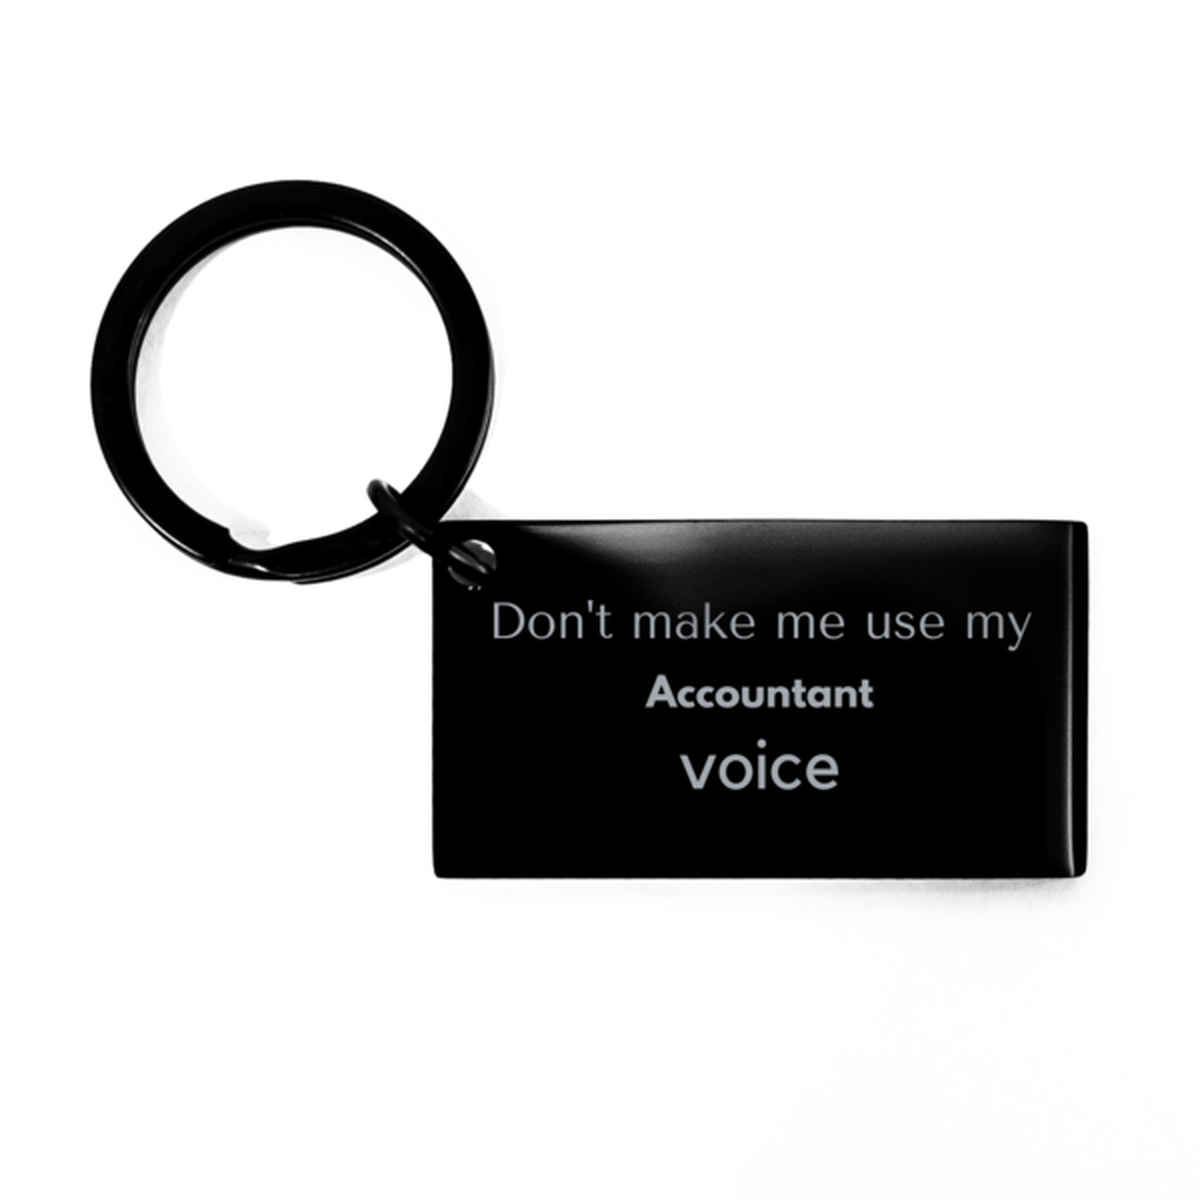 Don't make me use my Accountant voice, Sarcasm Accountant Gifts, Christmas Accountant Keychain Birthday Unique Gifts For Accountant Coworkers, Men, Women, Colleague, Friends